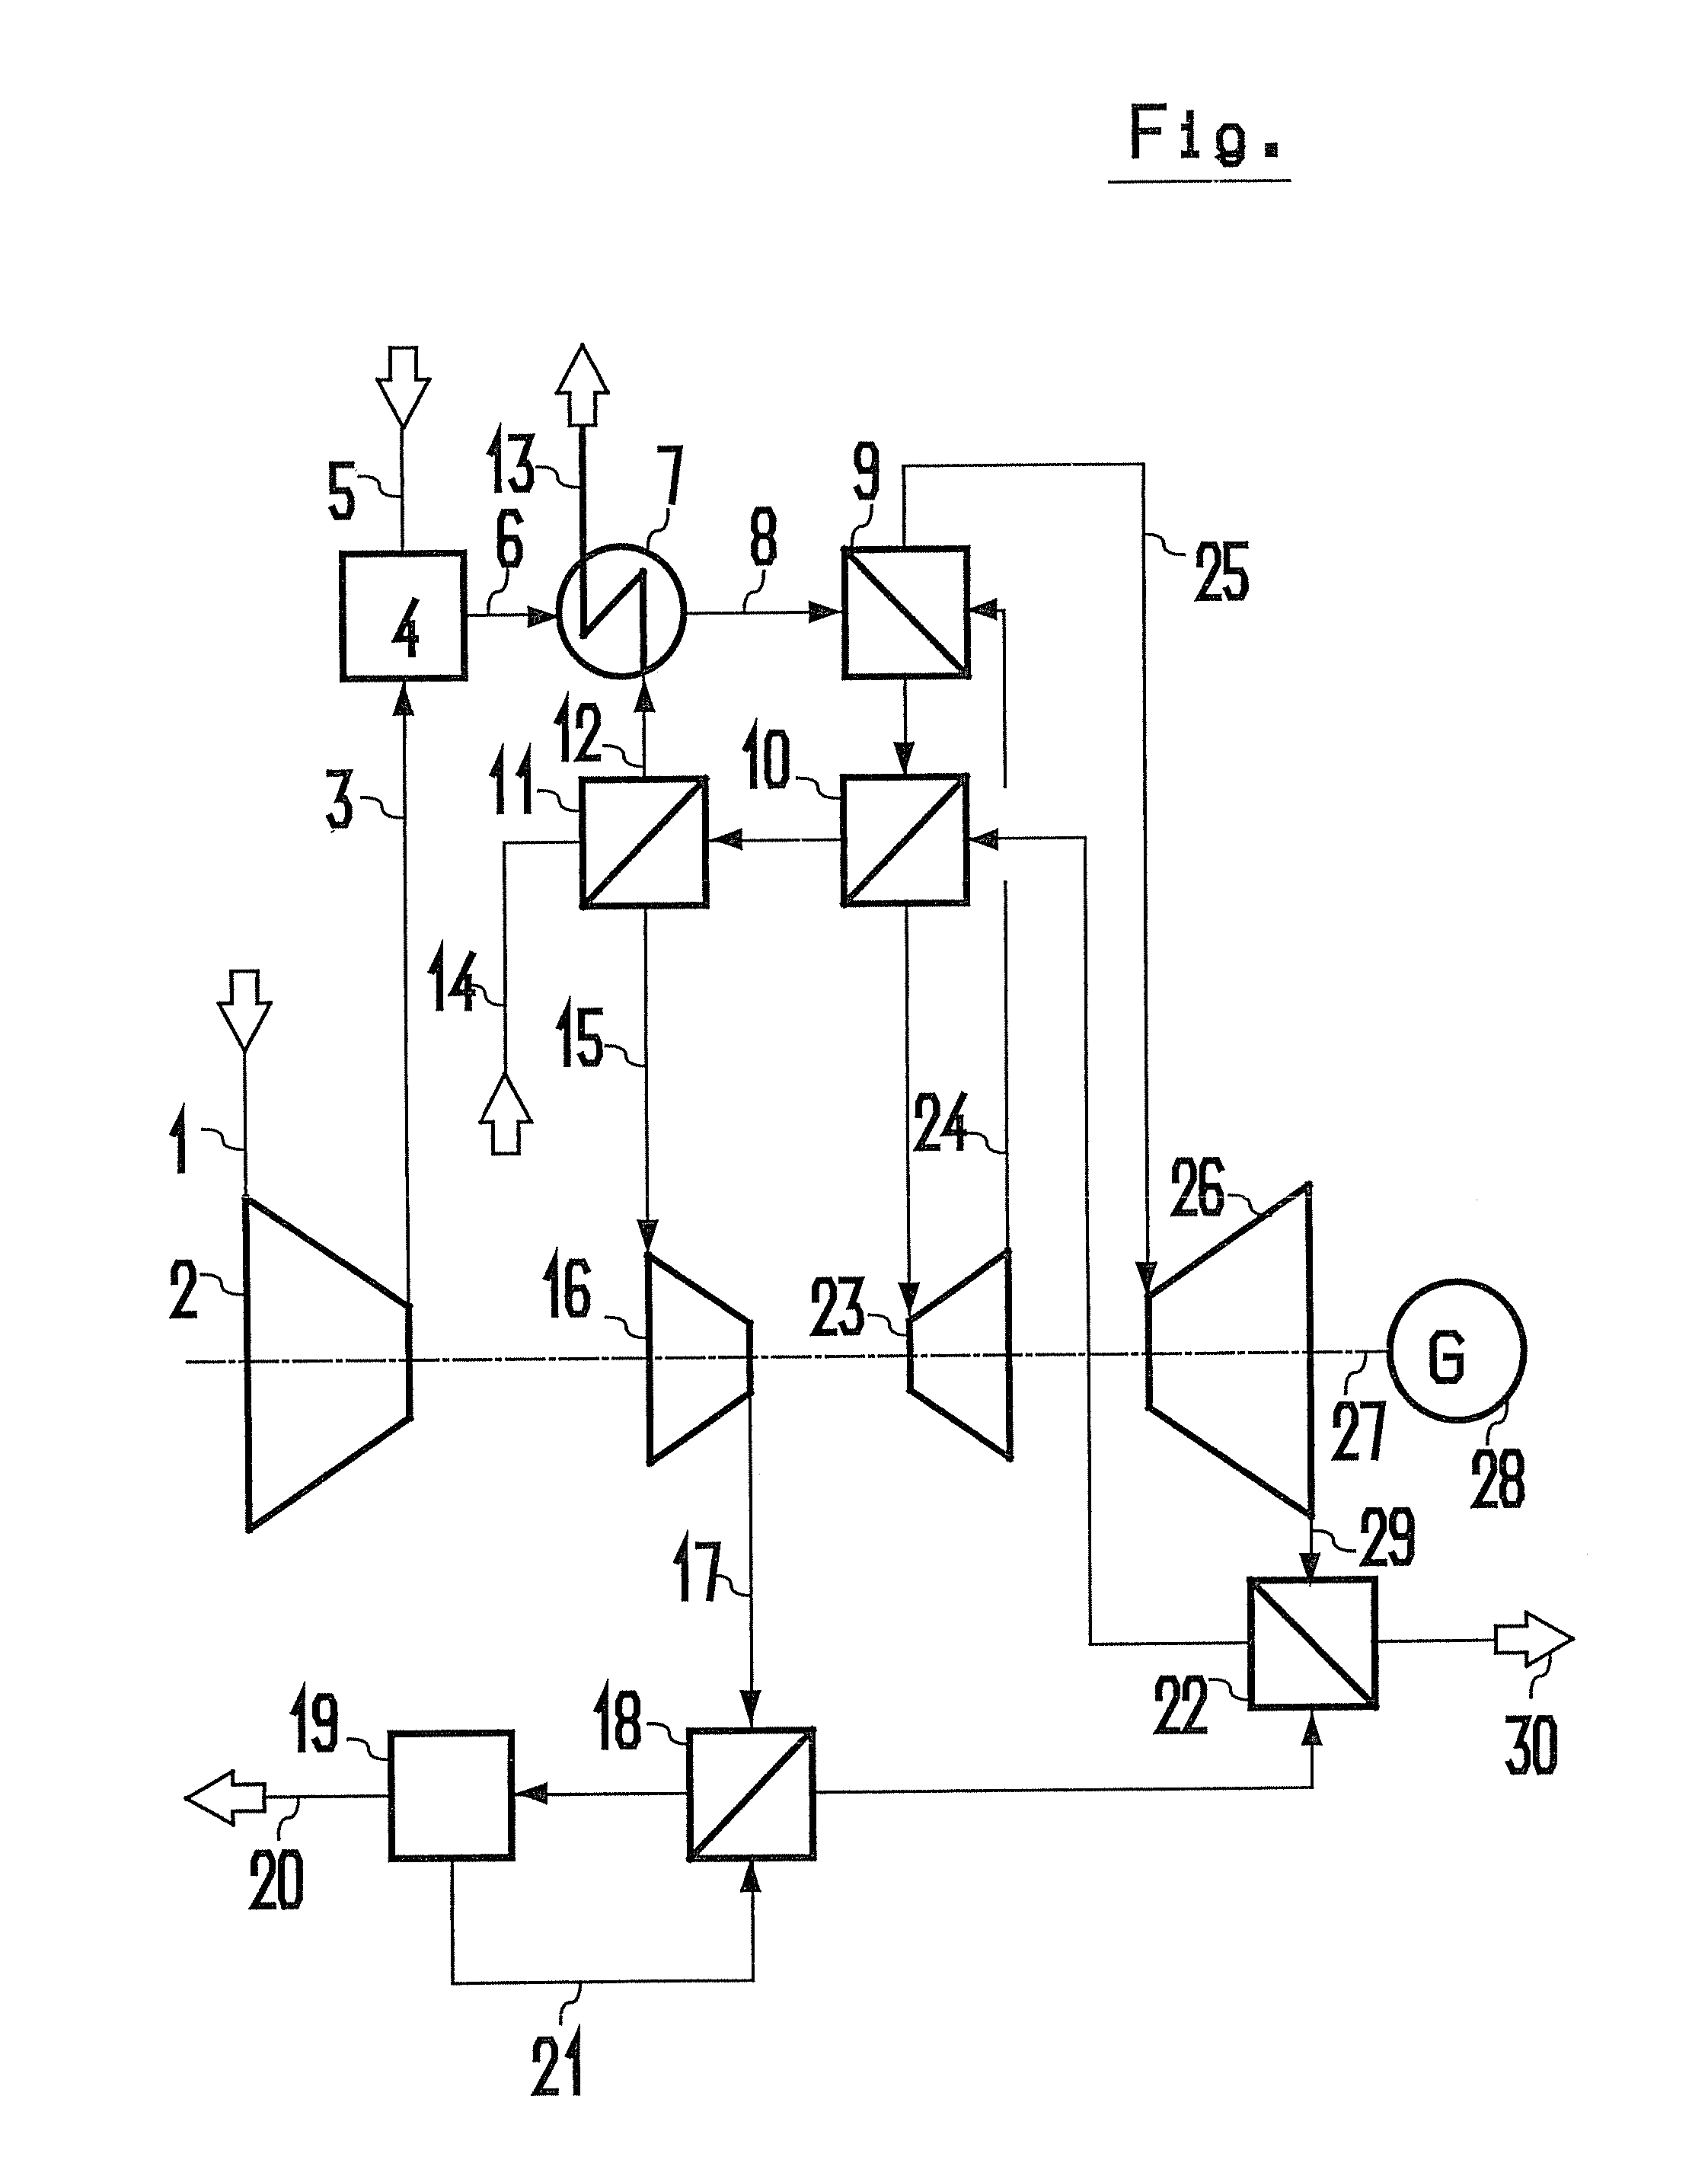 Method for the production of nitric acid